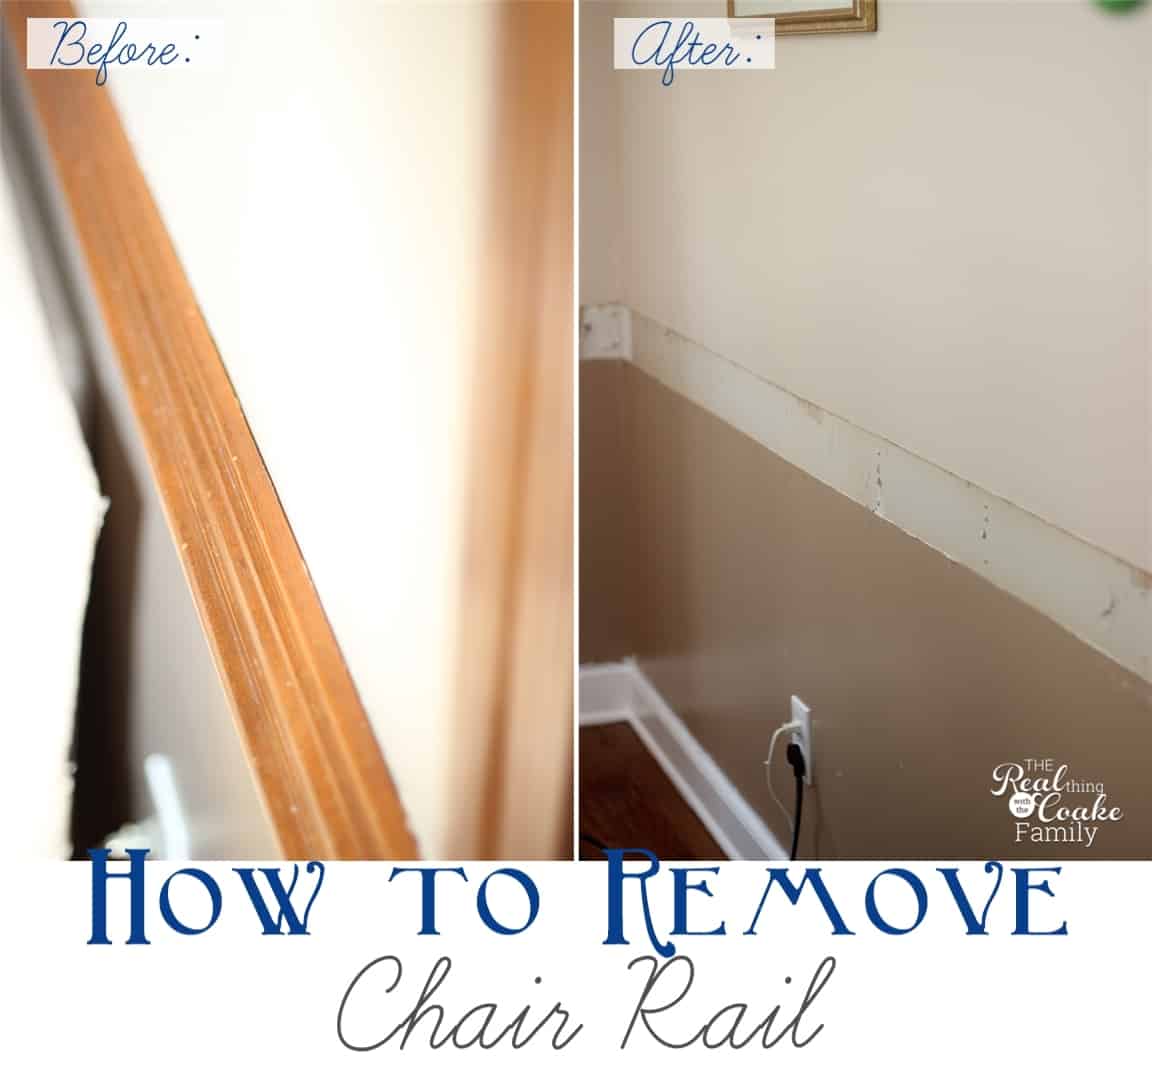 How to remove chair rail. Picture tutorial. #ChairRail #HomeImprovment #DIY #RealCoake